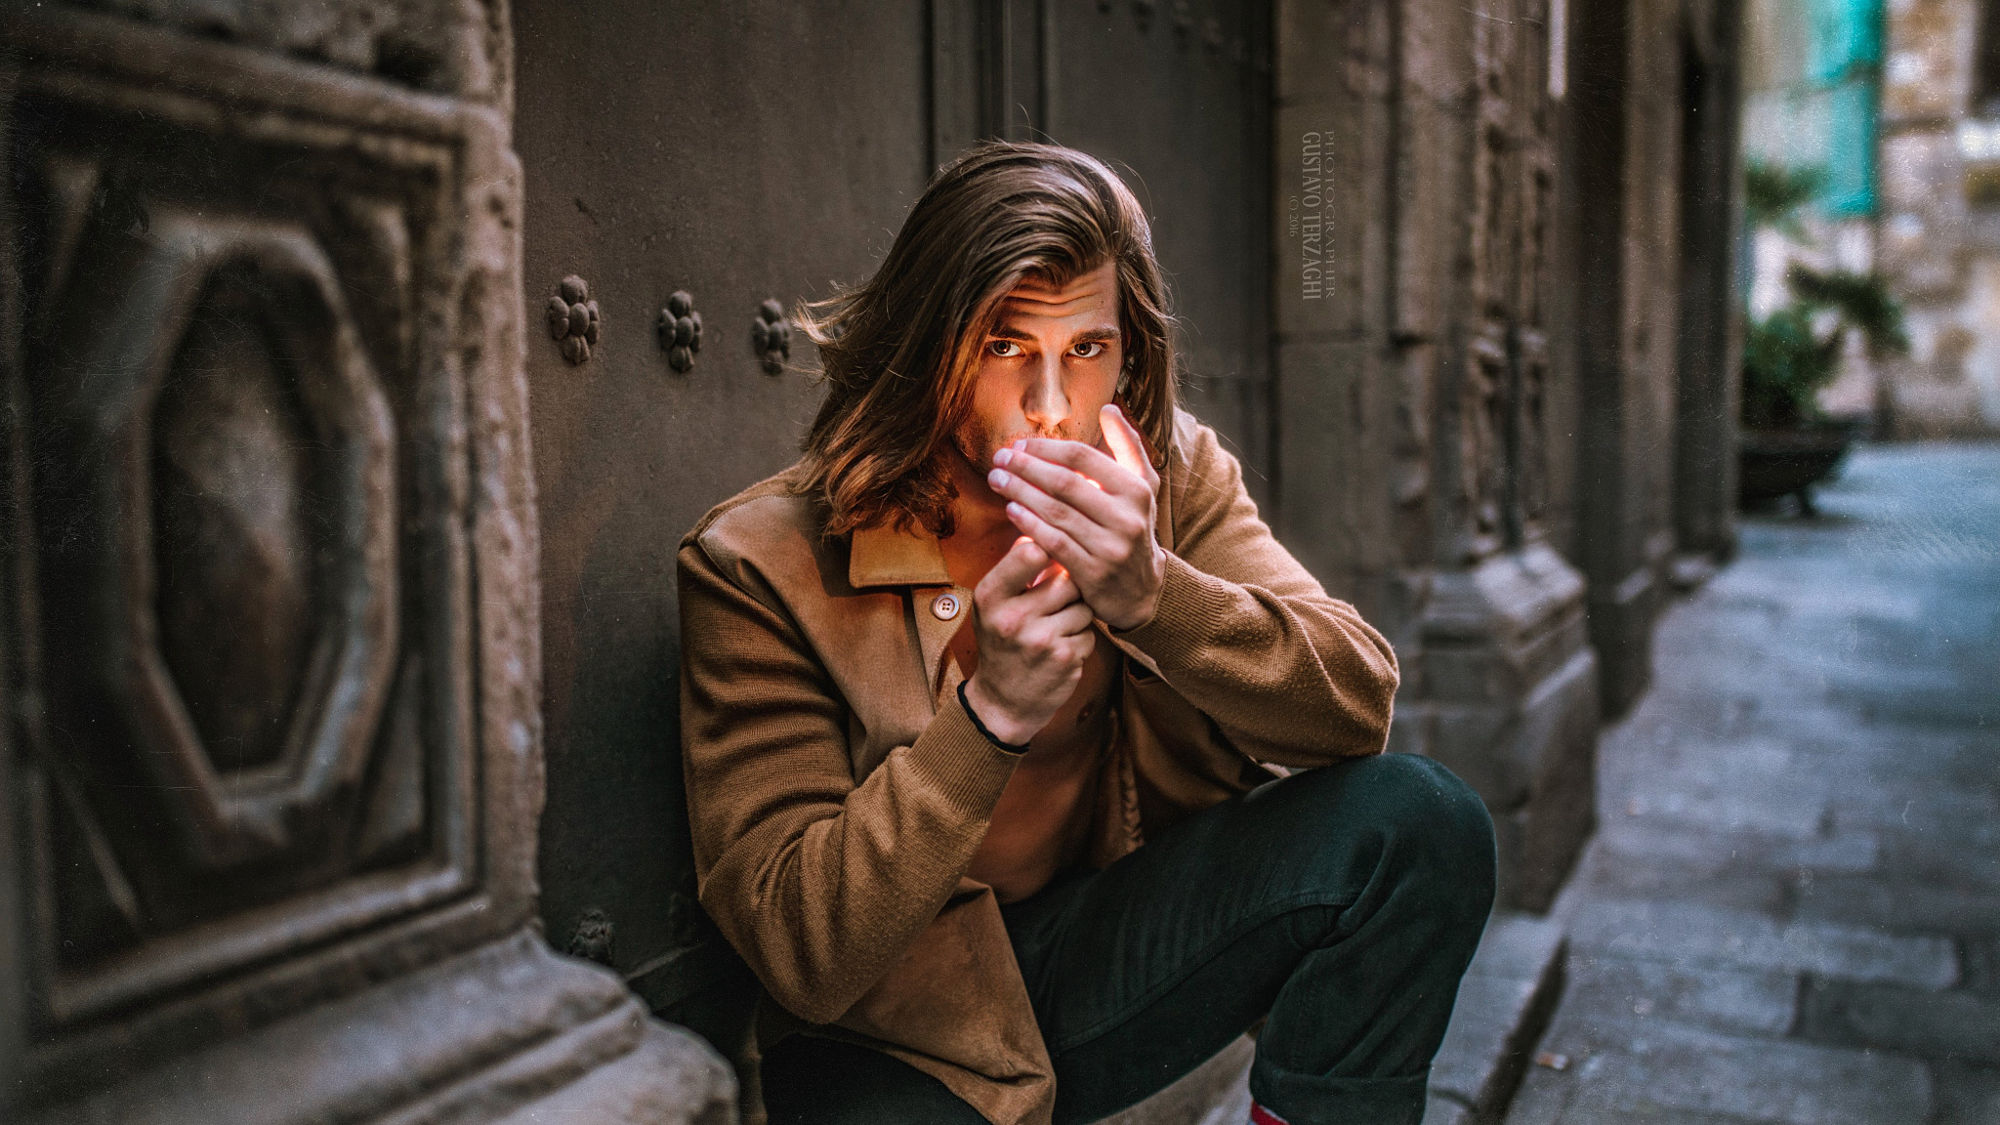 Men Male Models Brunette Long Hair Looking At Viewer Coats Jeans Brown City Smoking 2000x1125